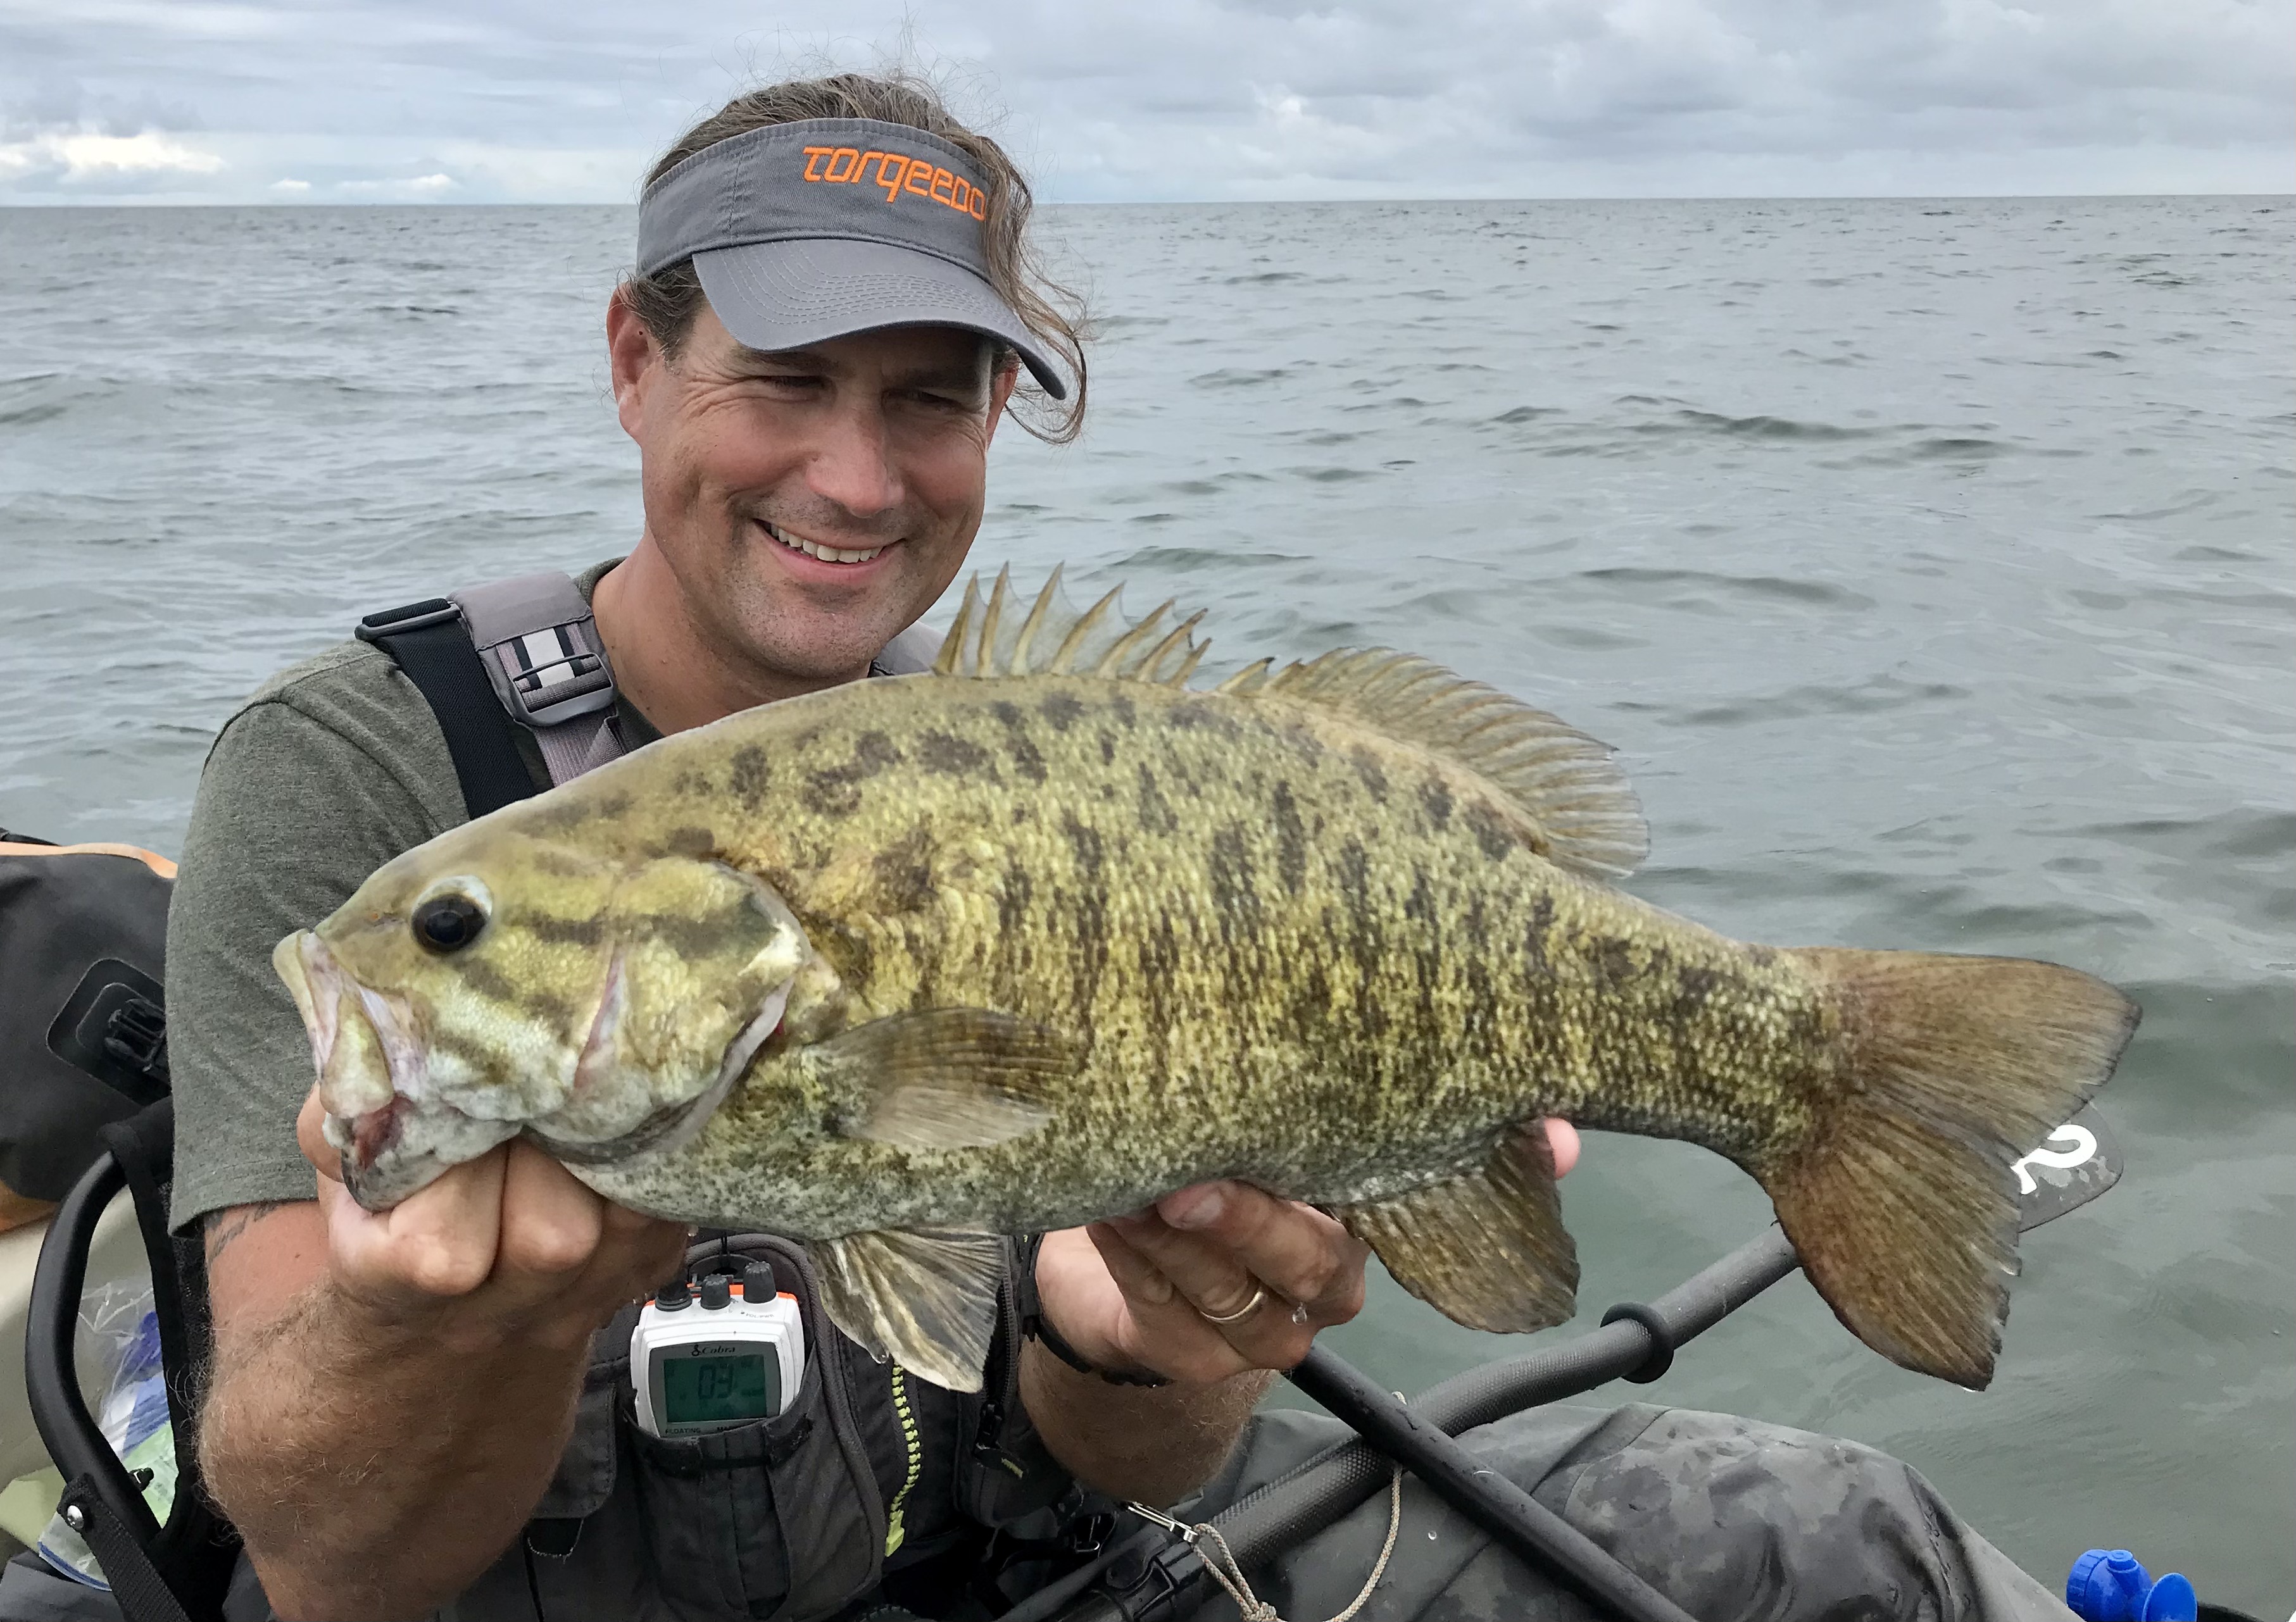 Big Great Lakes Smallmouth Bass caught from the kayak